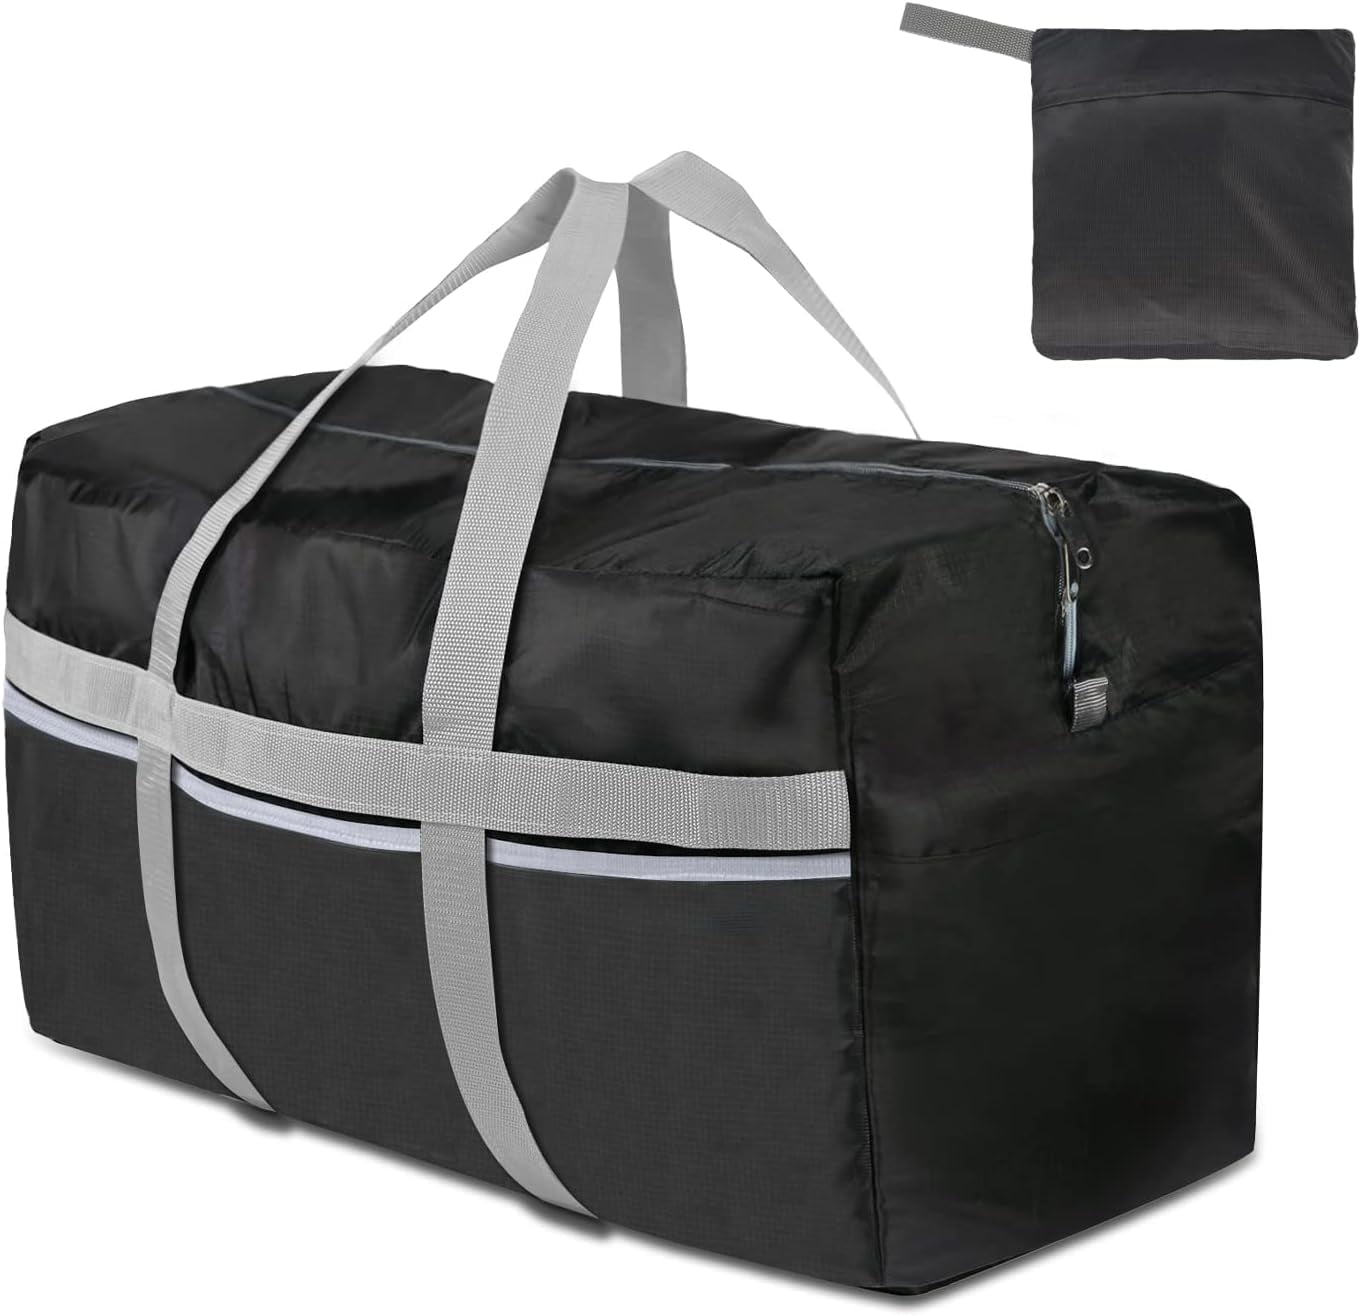 Extra Large Duffle Bag Lightweight, 96L Travel Duffel Bag Foldable for ...